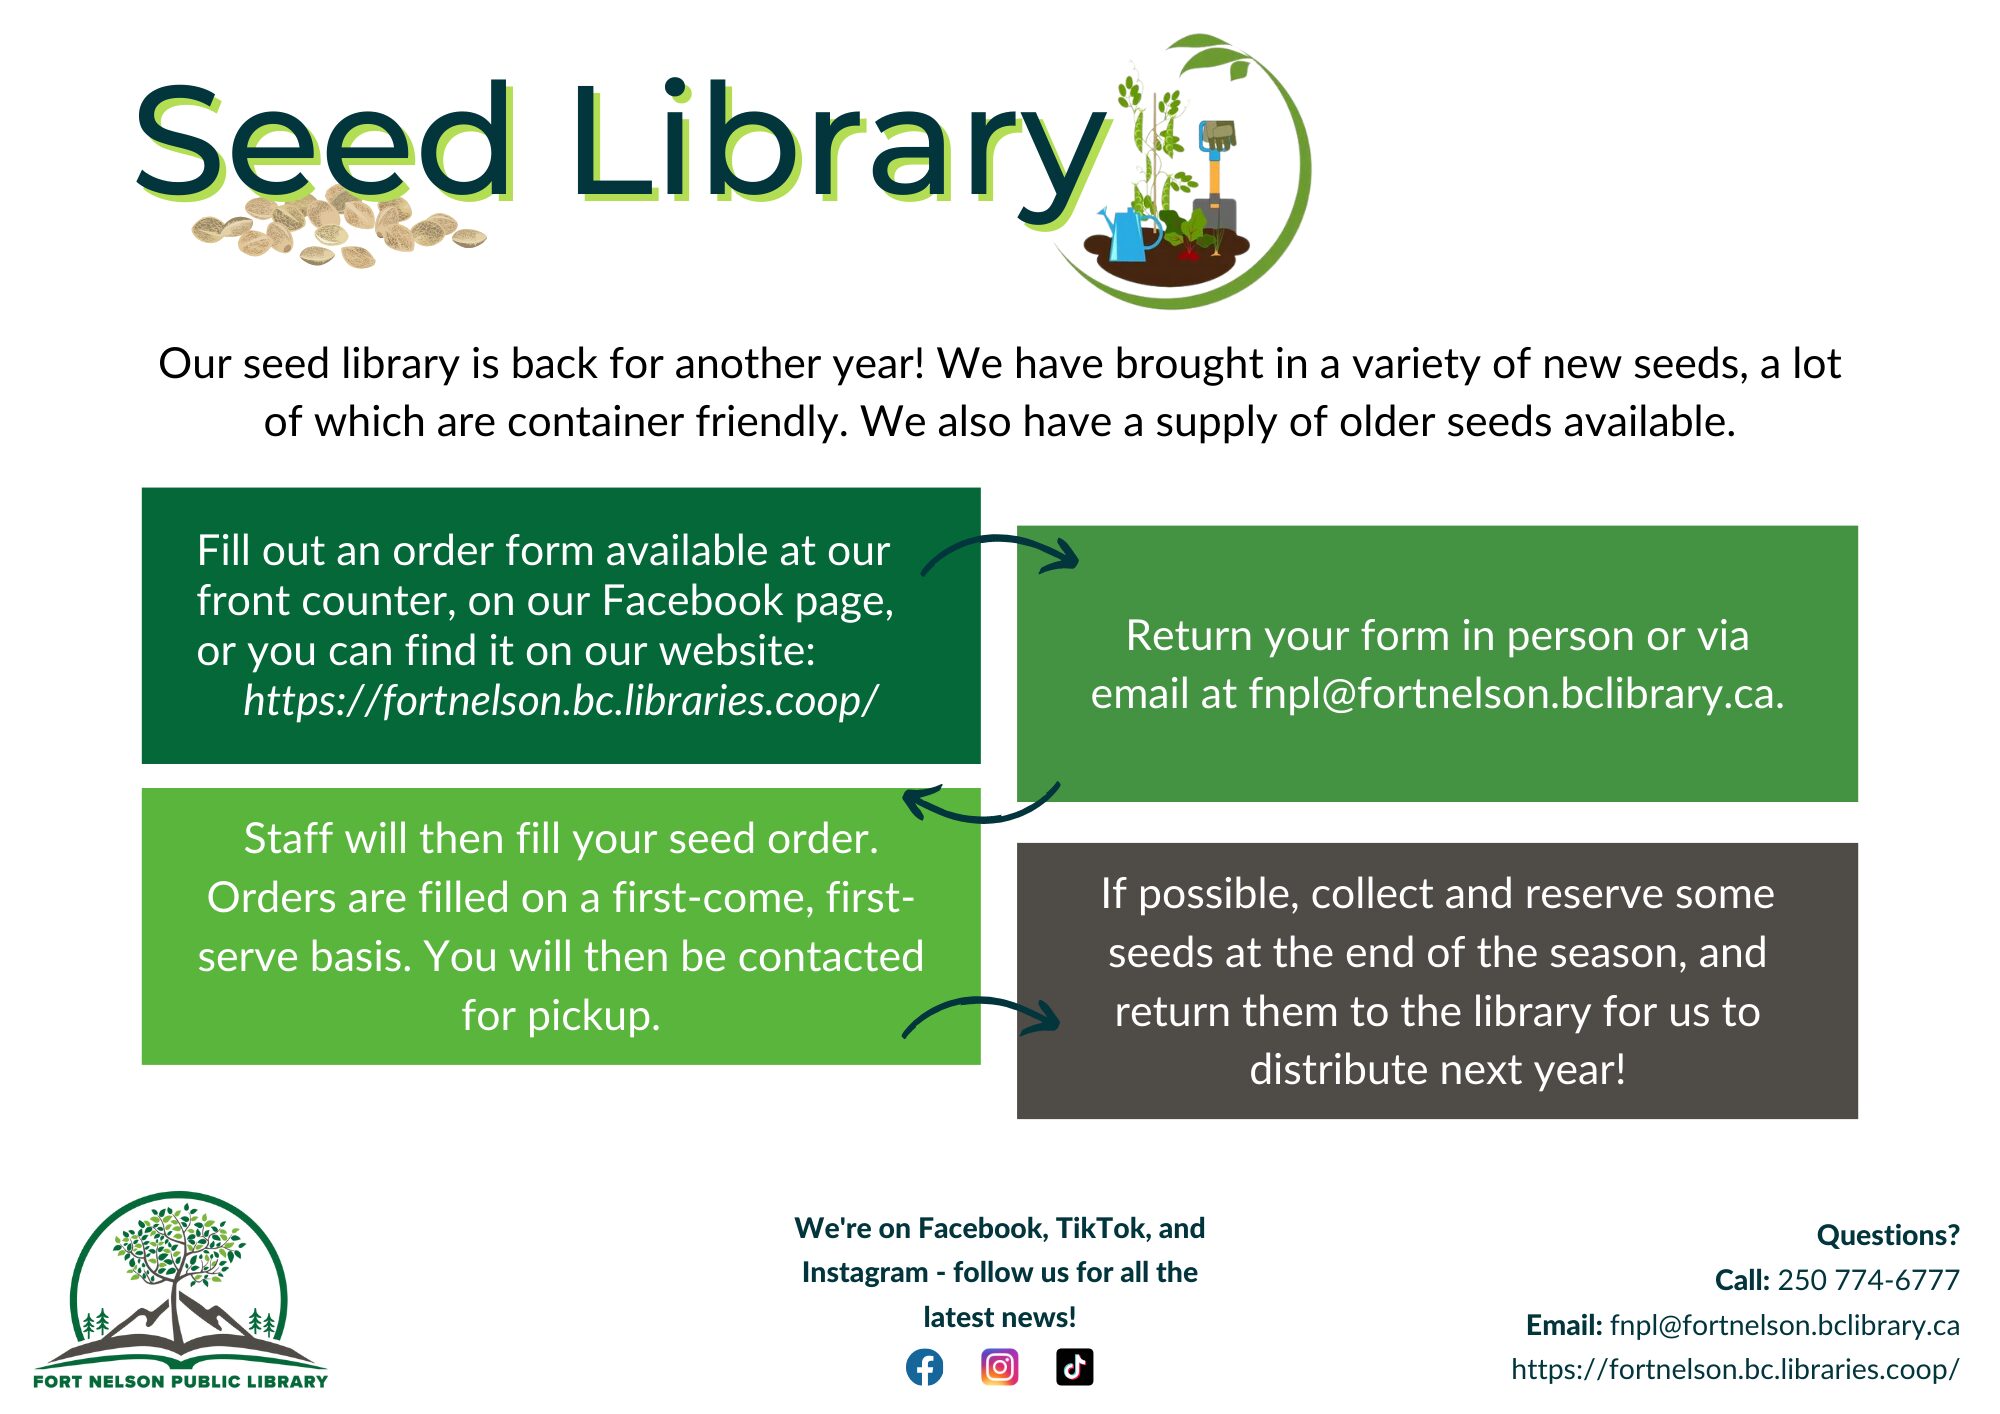 Seed Library Instructional Image